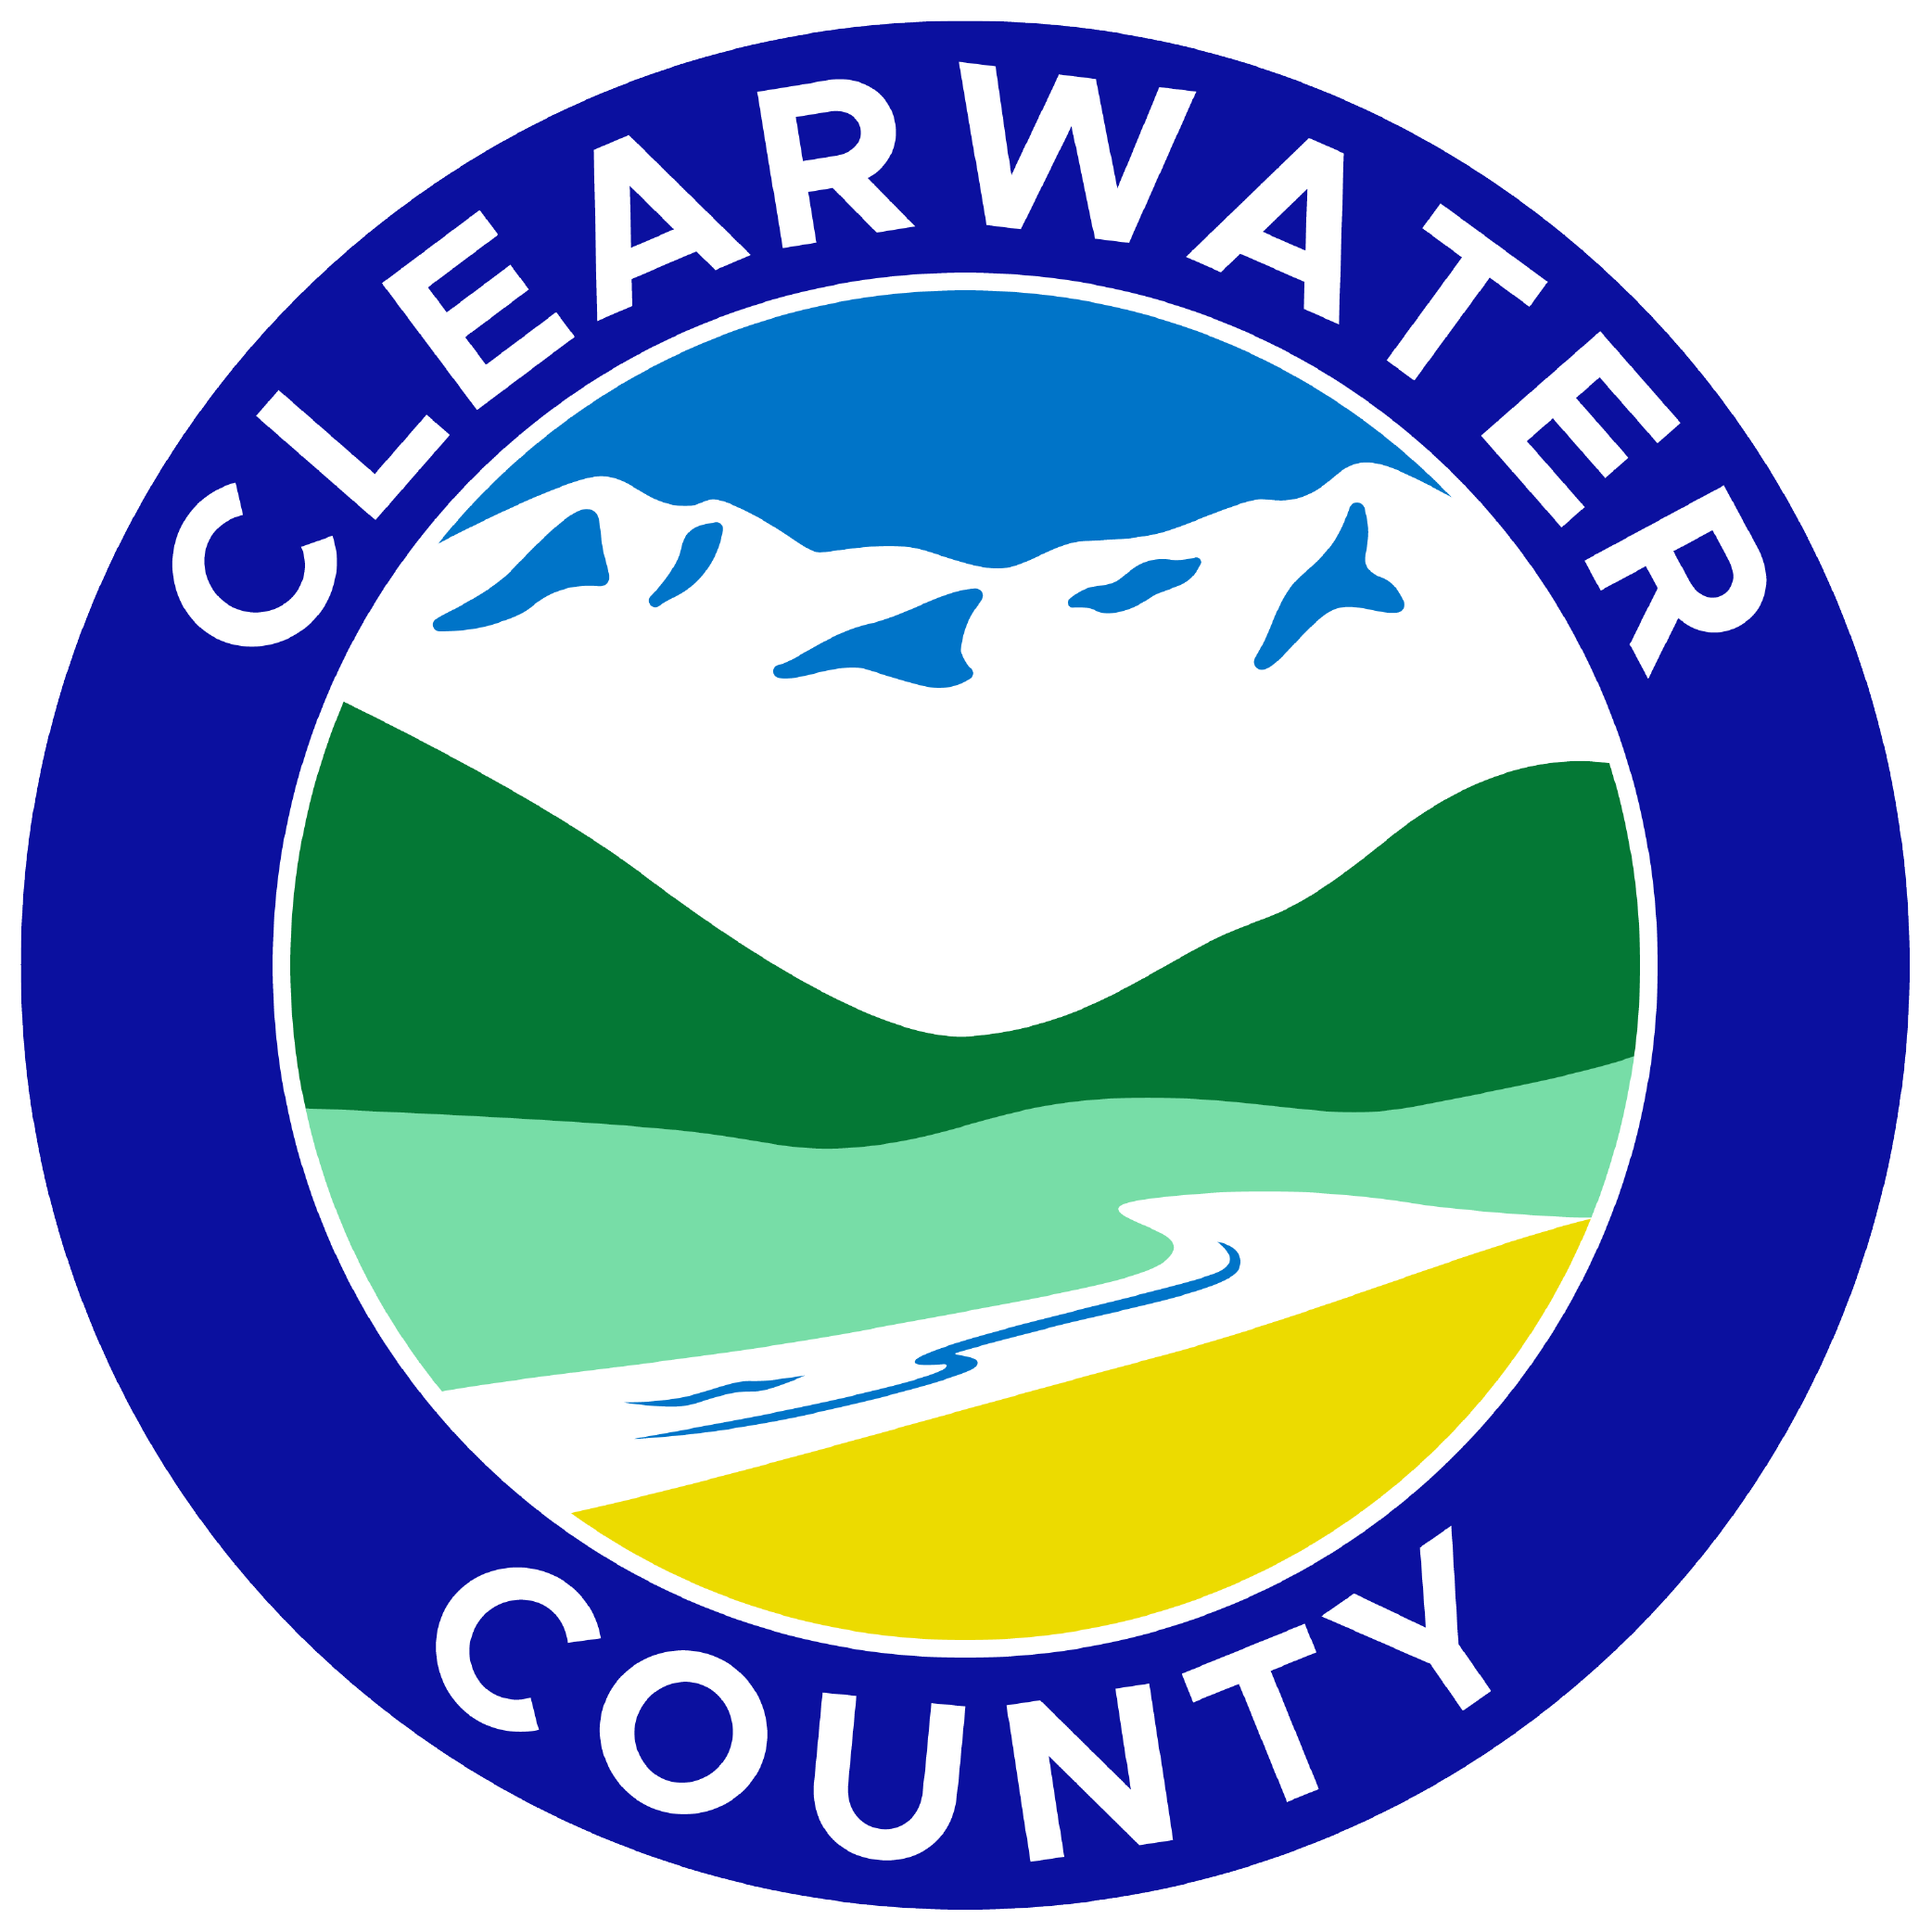 Clearwater County - Land Use Bylaw Rewrite